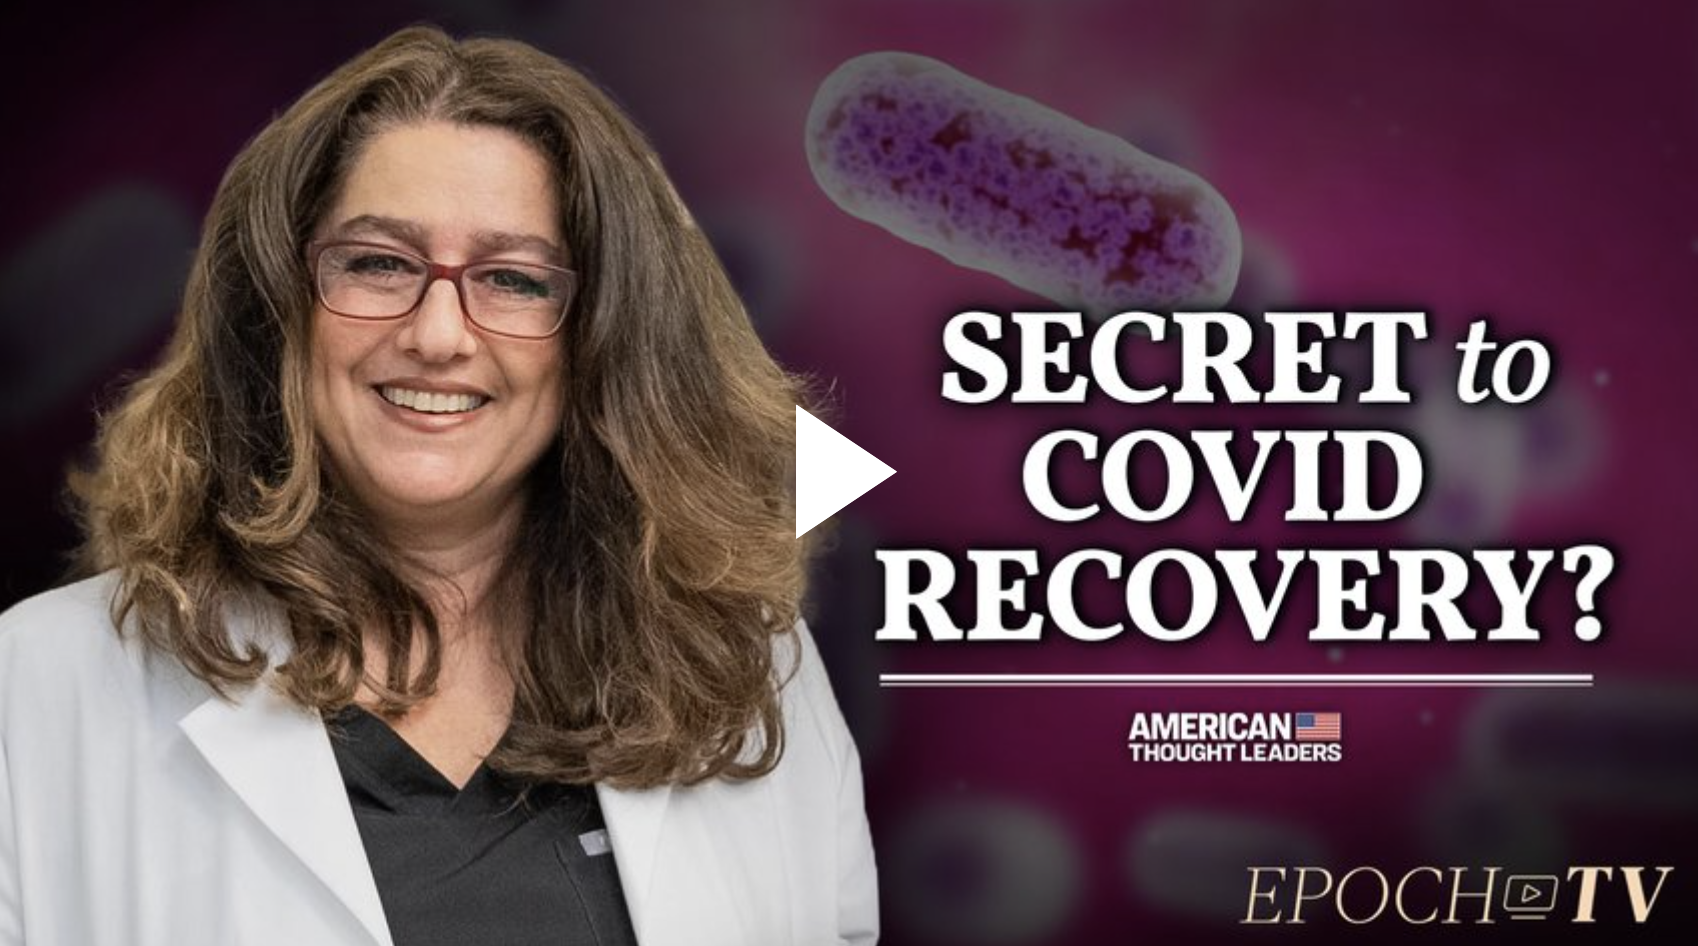 Dr. Sabine Hazan: The Gut Bacteria That's Missing in People Who Get Severe COVID